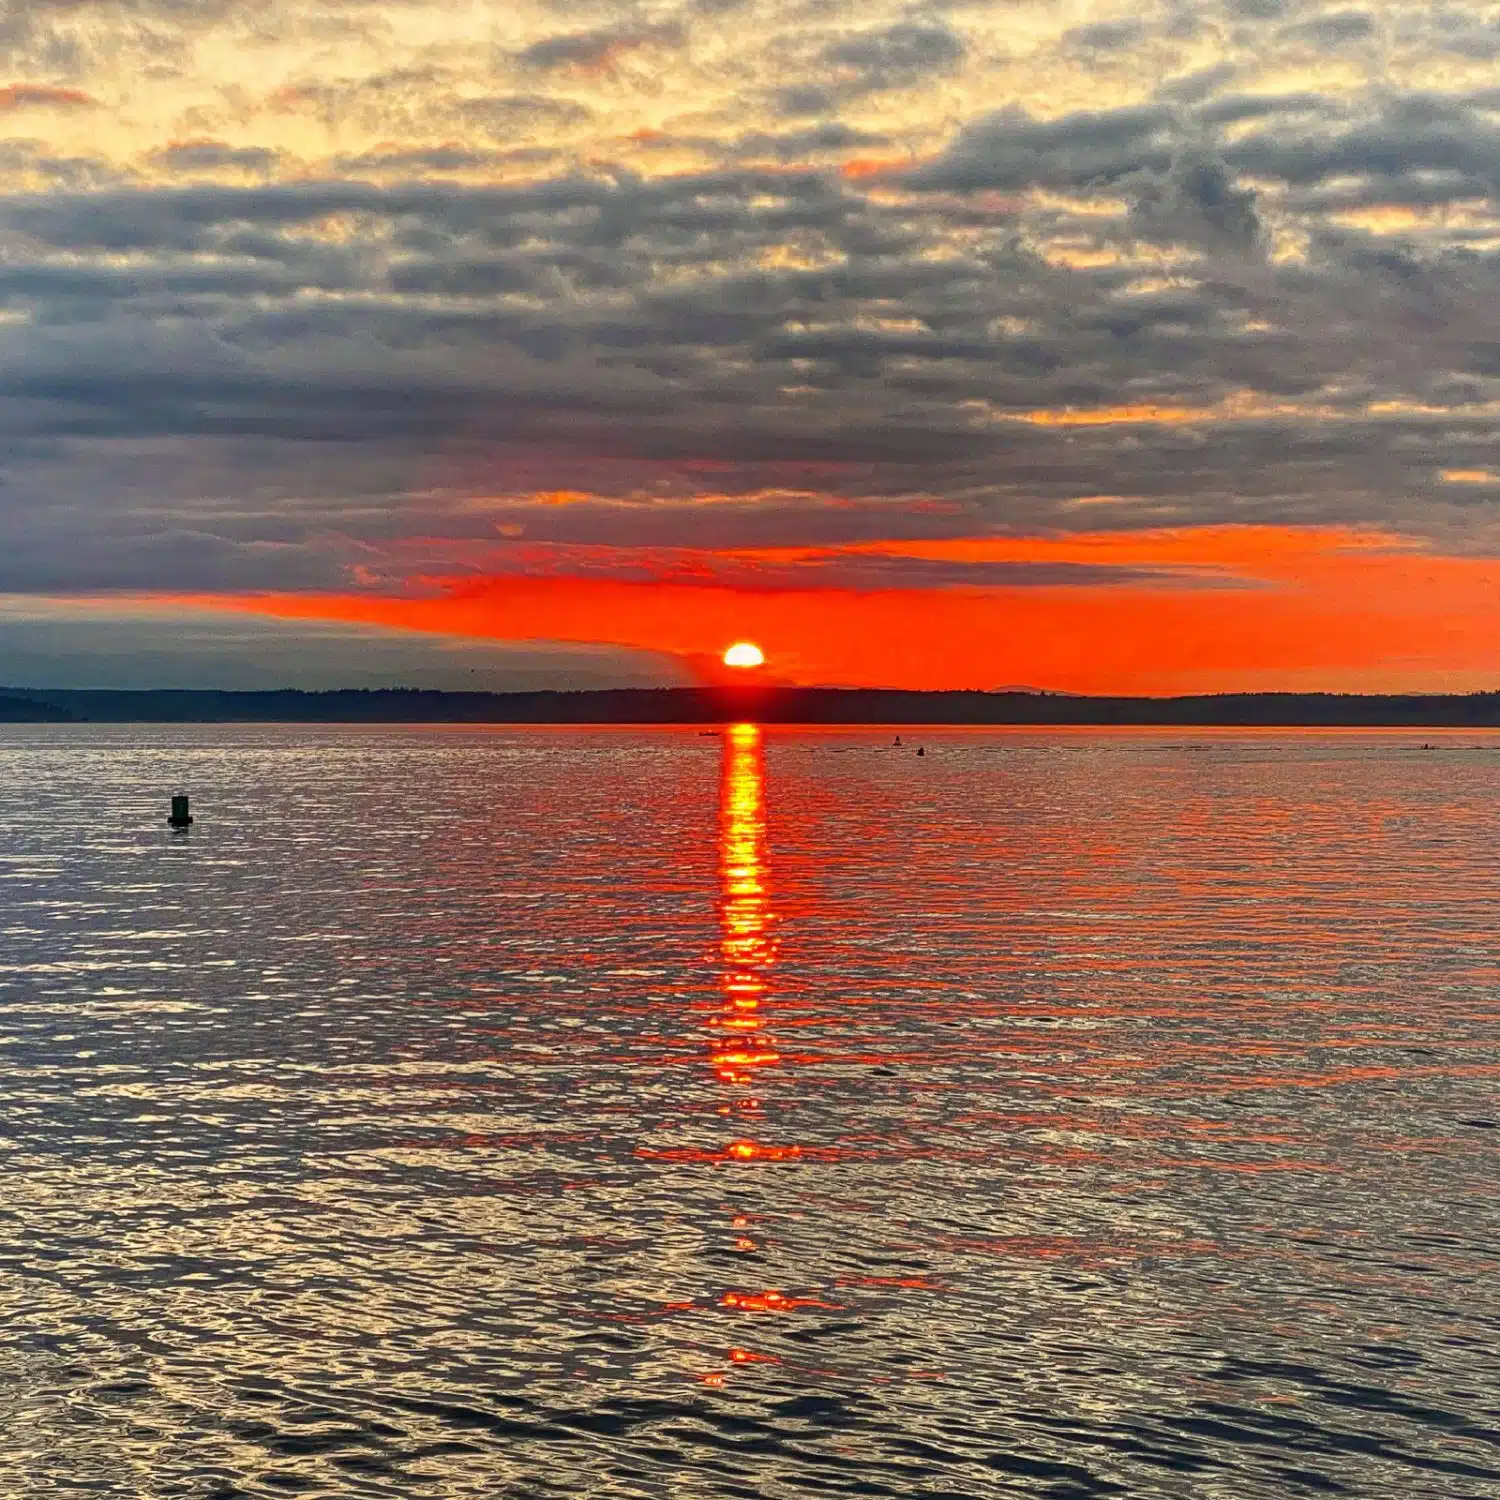 THE place to see sunsets in Seattle...